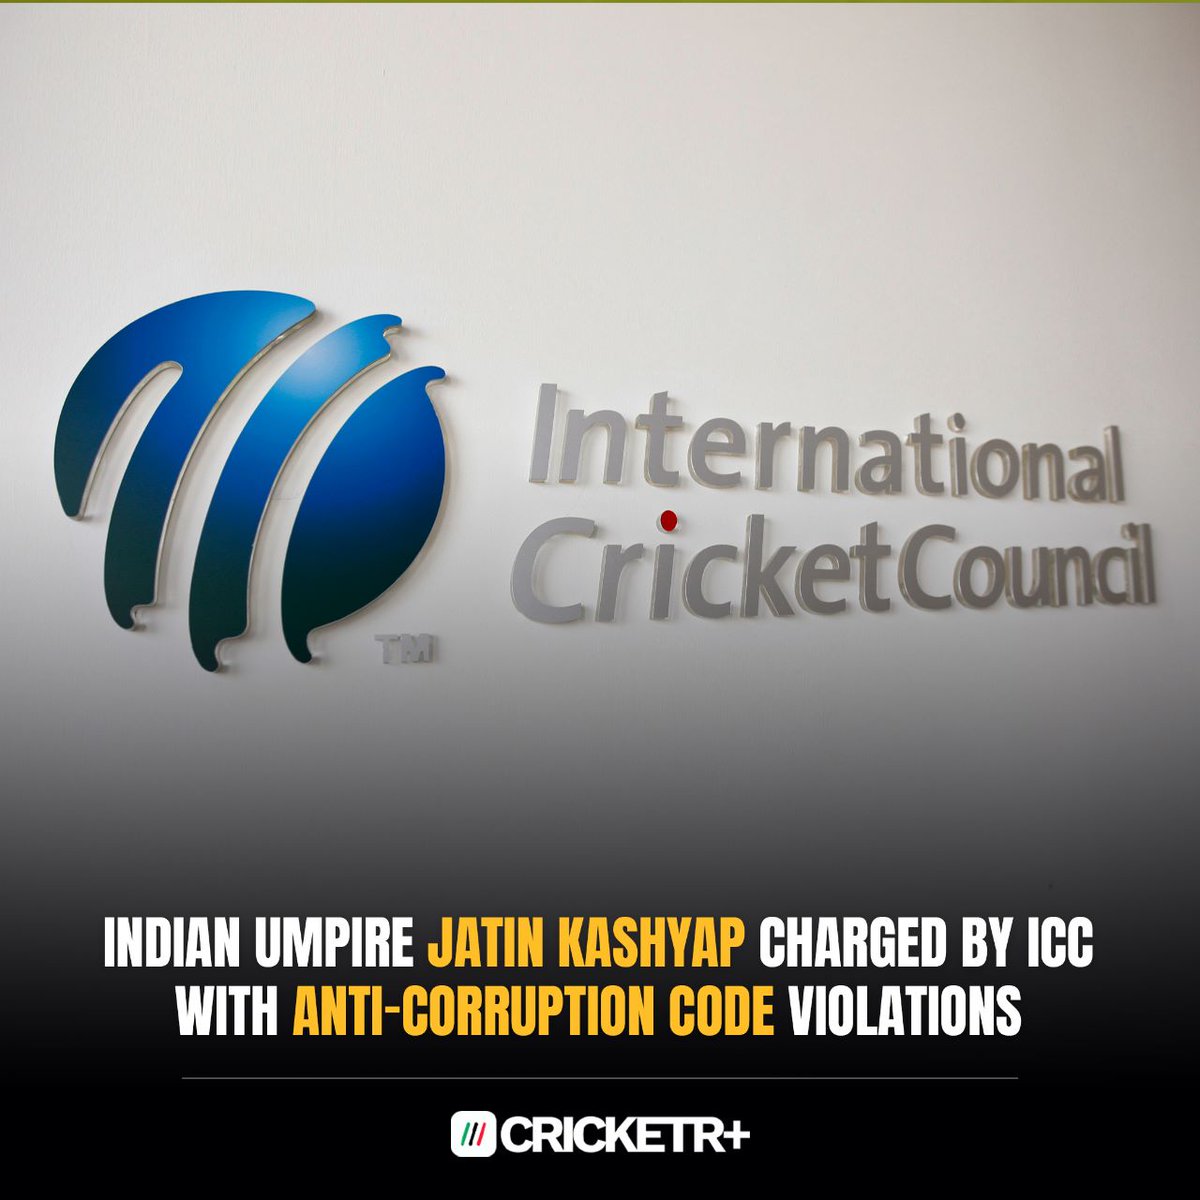 ICC charges Indian umpire Jatin Kashyap with breaching Anti-Corruption Code, relating to alleged attempts to corrupt players during the 2022 Asia Cup Qualifiers. Kashyap has 14 days to respond to the charges 😲

#ICC #AntiCorruptionCode #JatinKashyap #AsiaCup2022 #CricketR